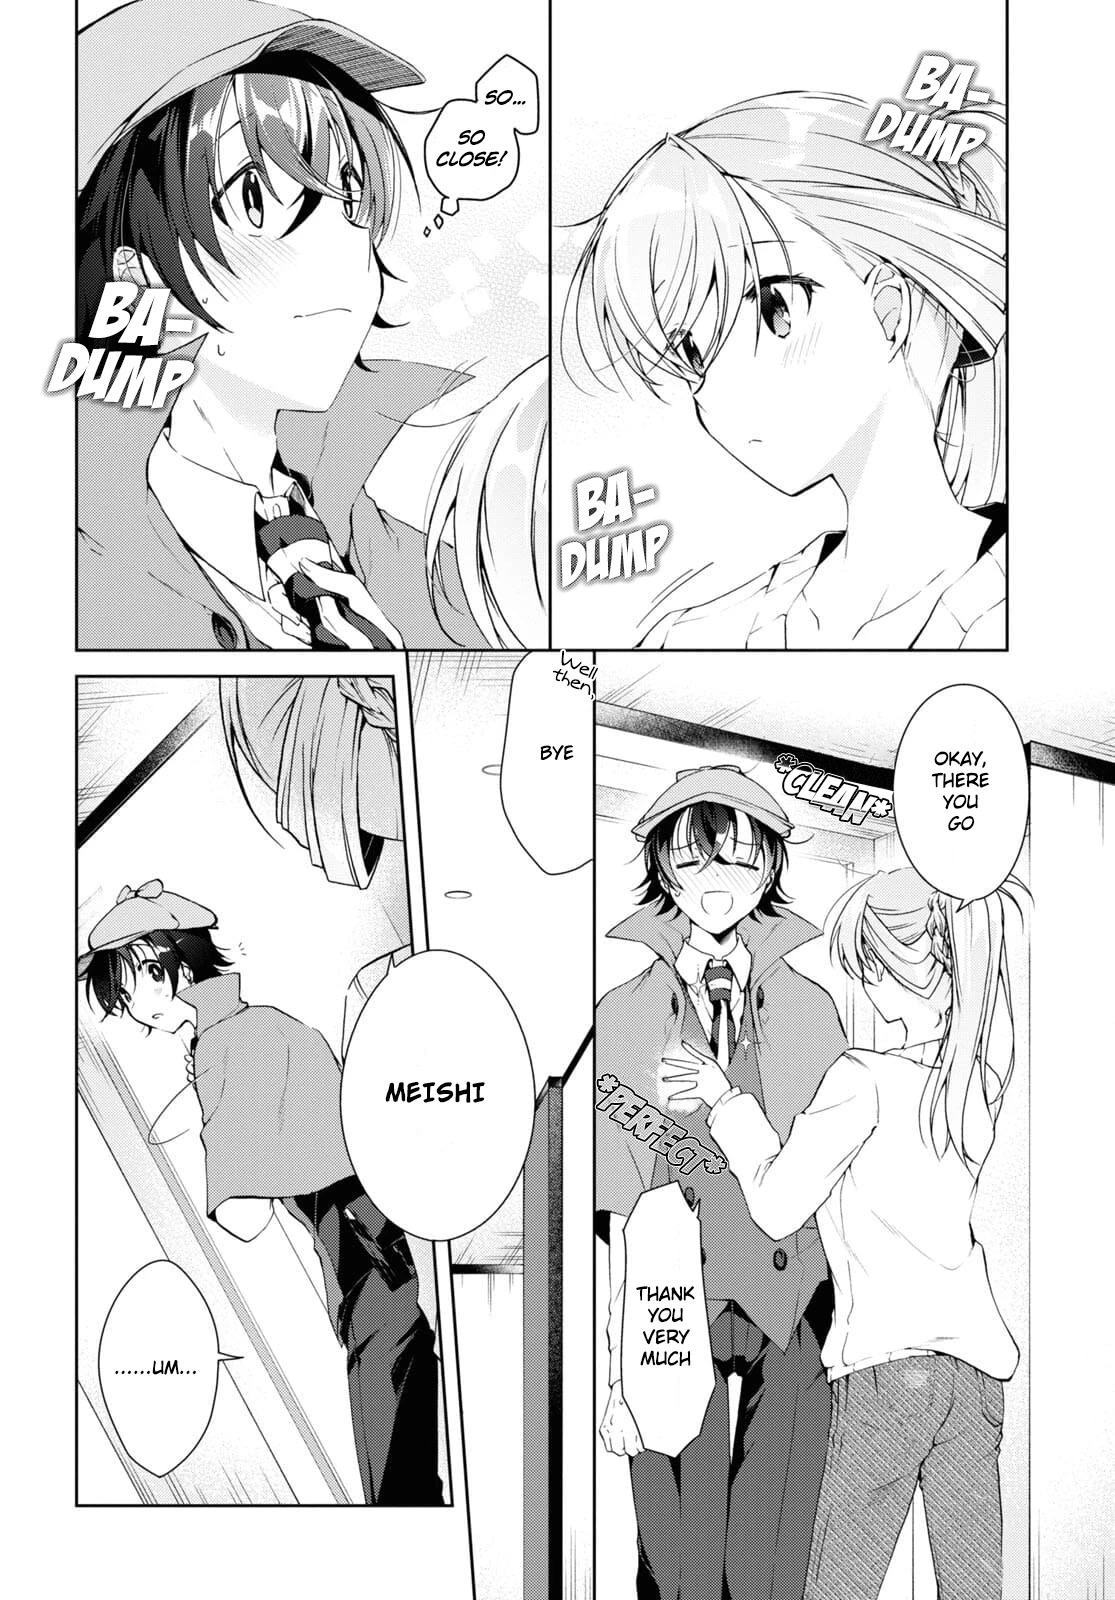 Isshiki-san Wants to Know About Love. - chapter 14 - #2